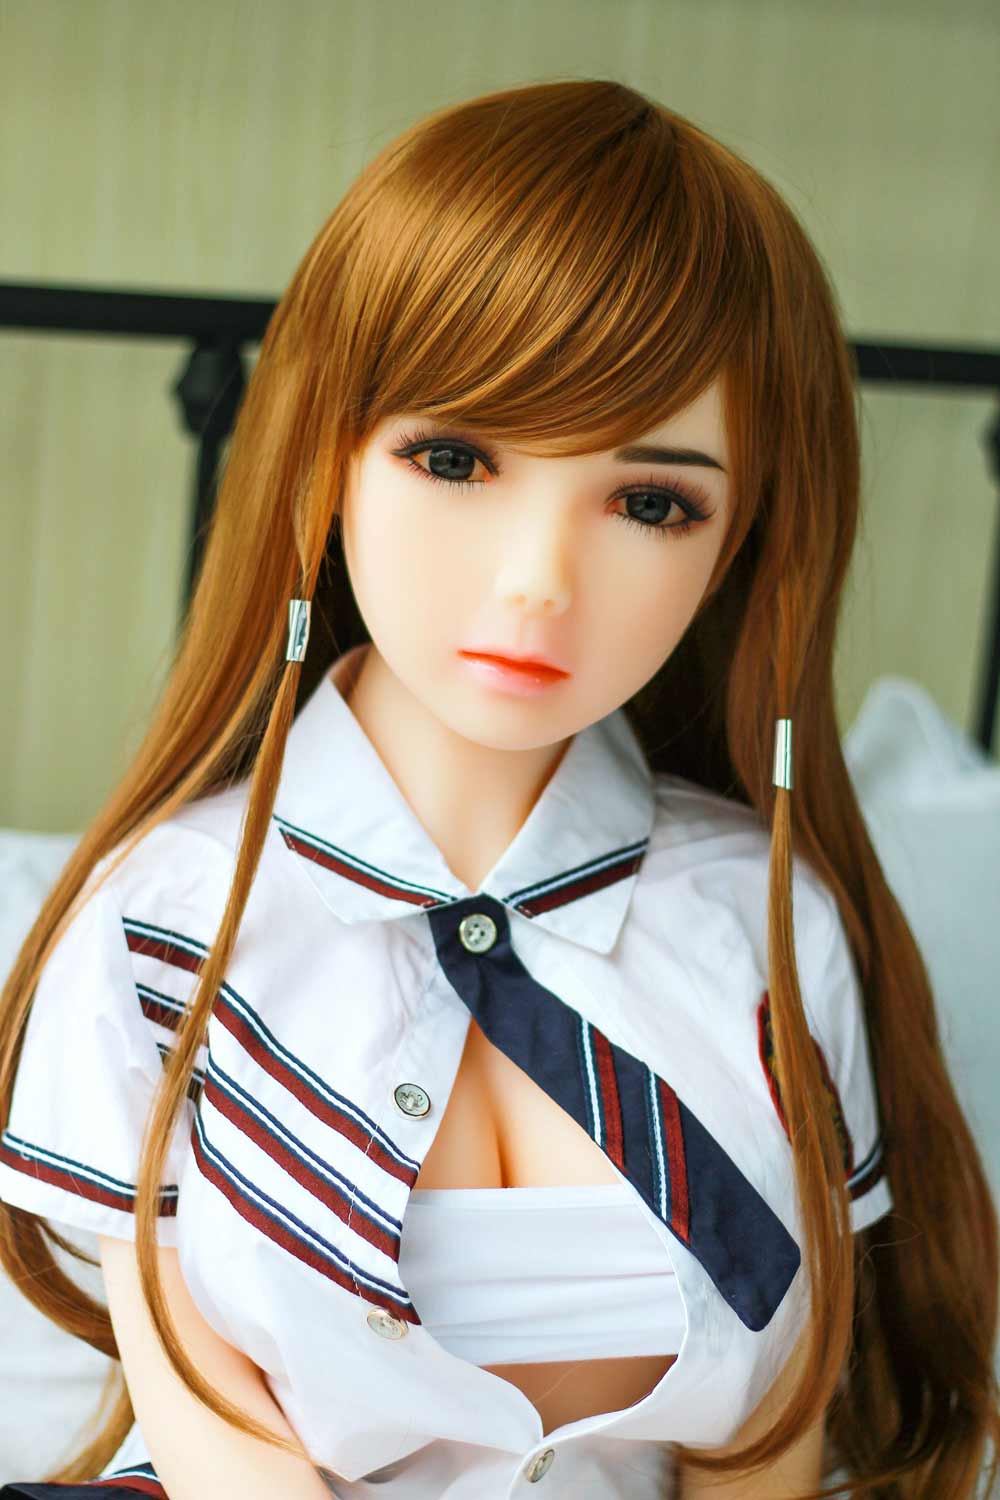 A mini sex doll with unbuttoned clothes and breasts exposed